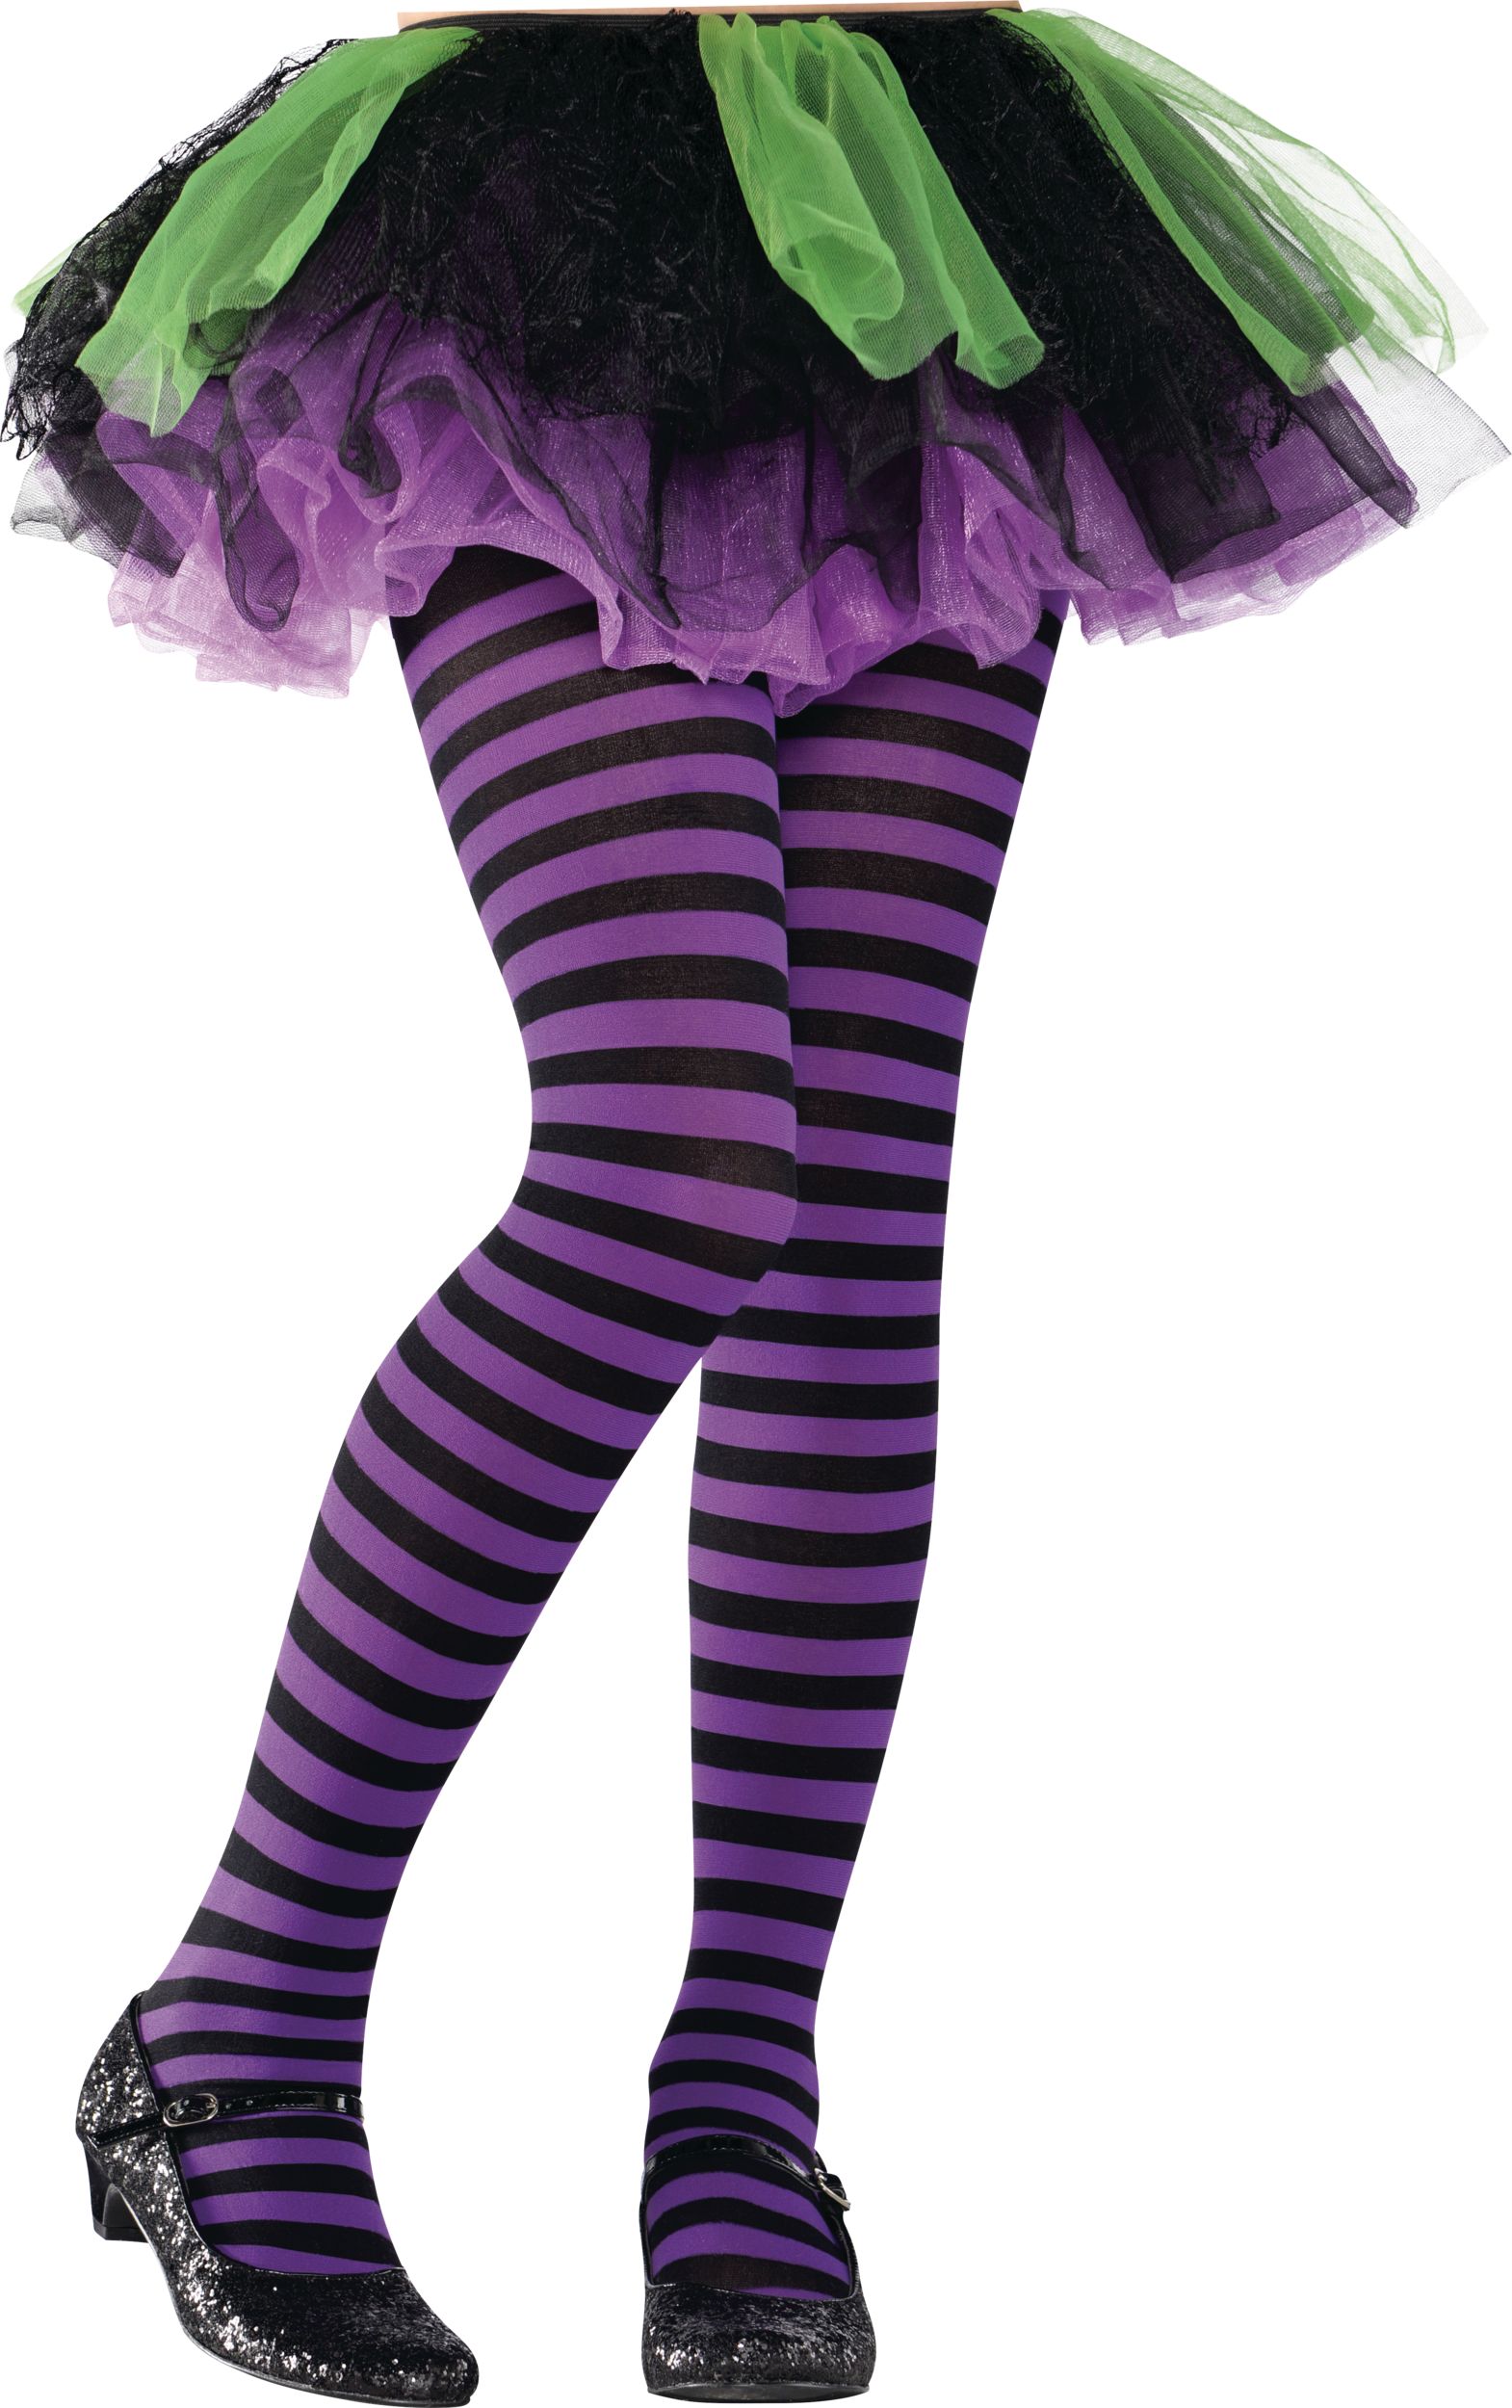 Kids' Semi-Opaque Seamless Tights, Purple/Black Striped, One Size, Wearable  Costume Accessory for Halloween